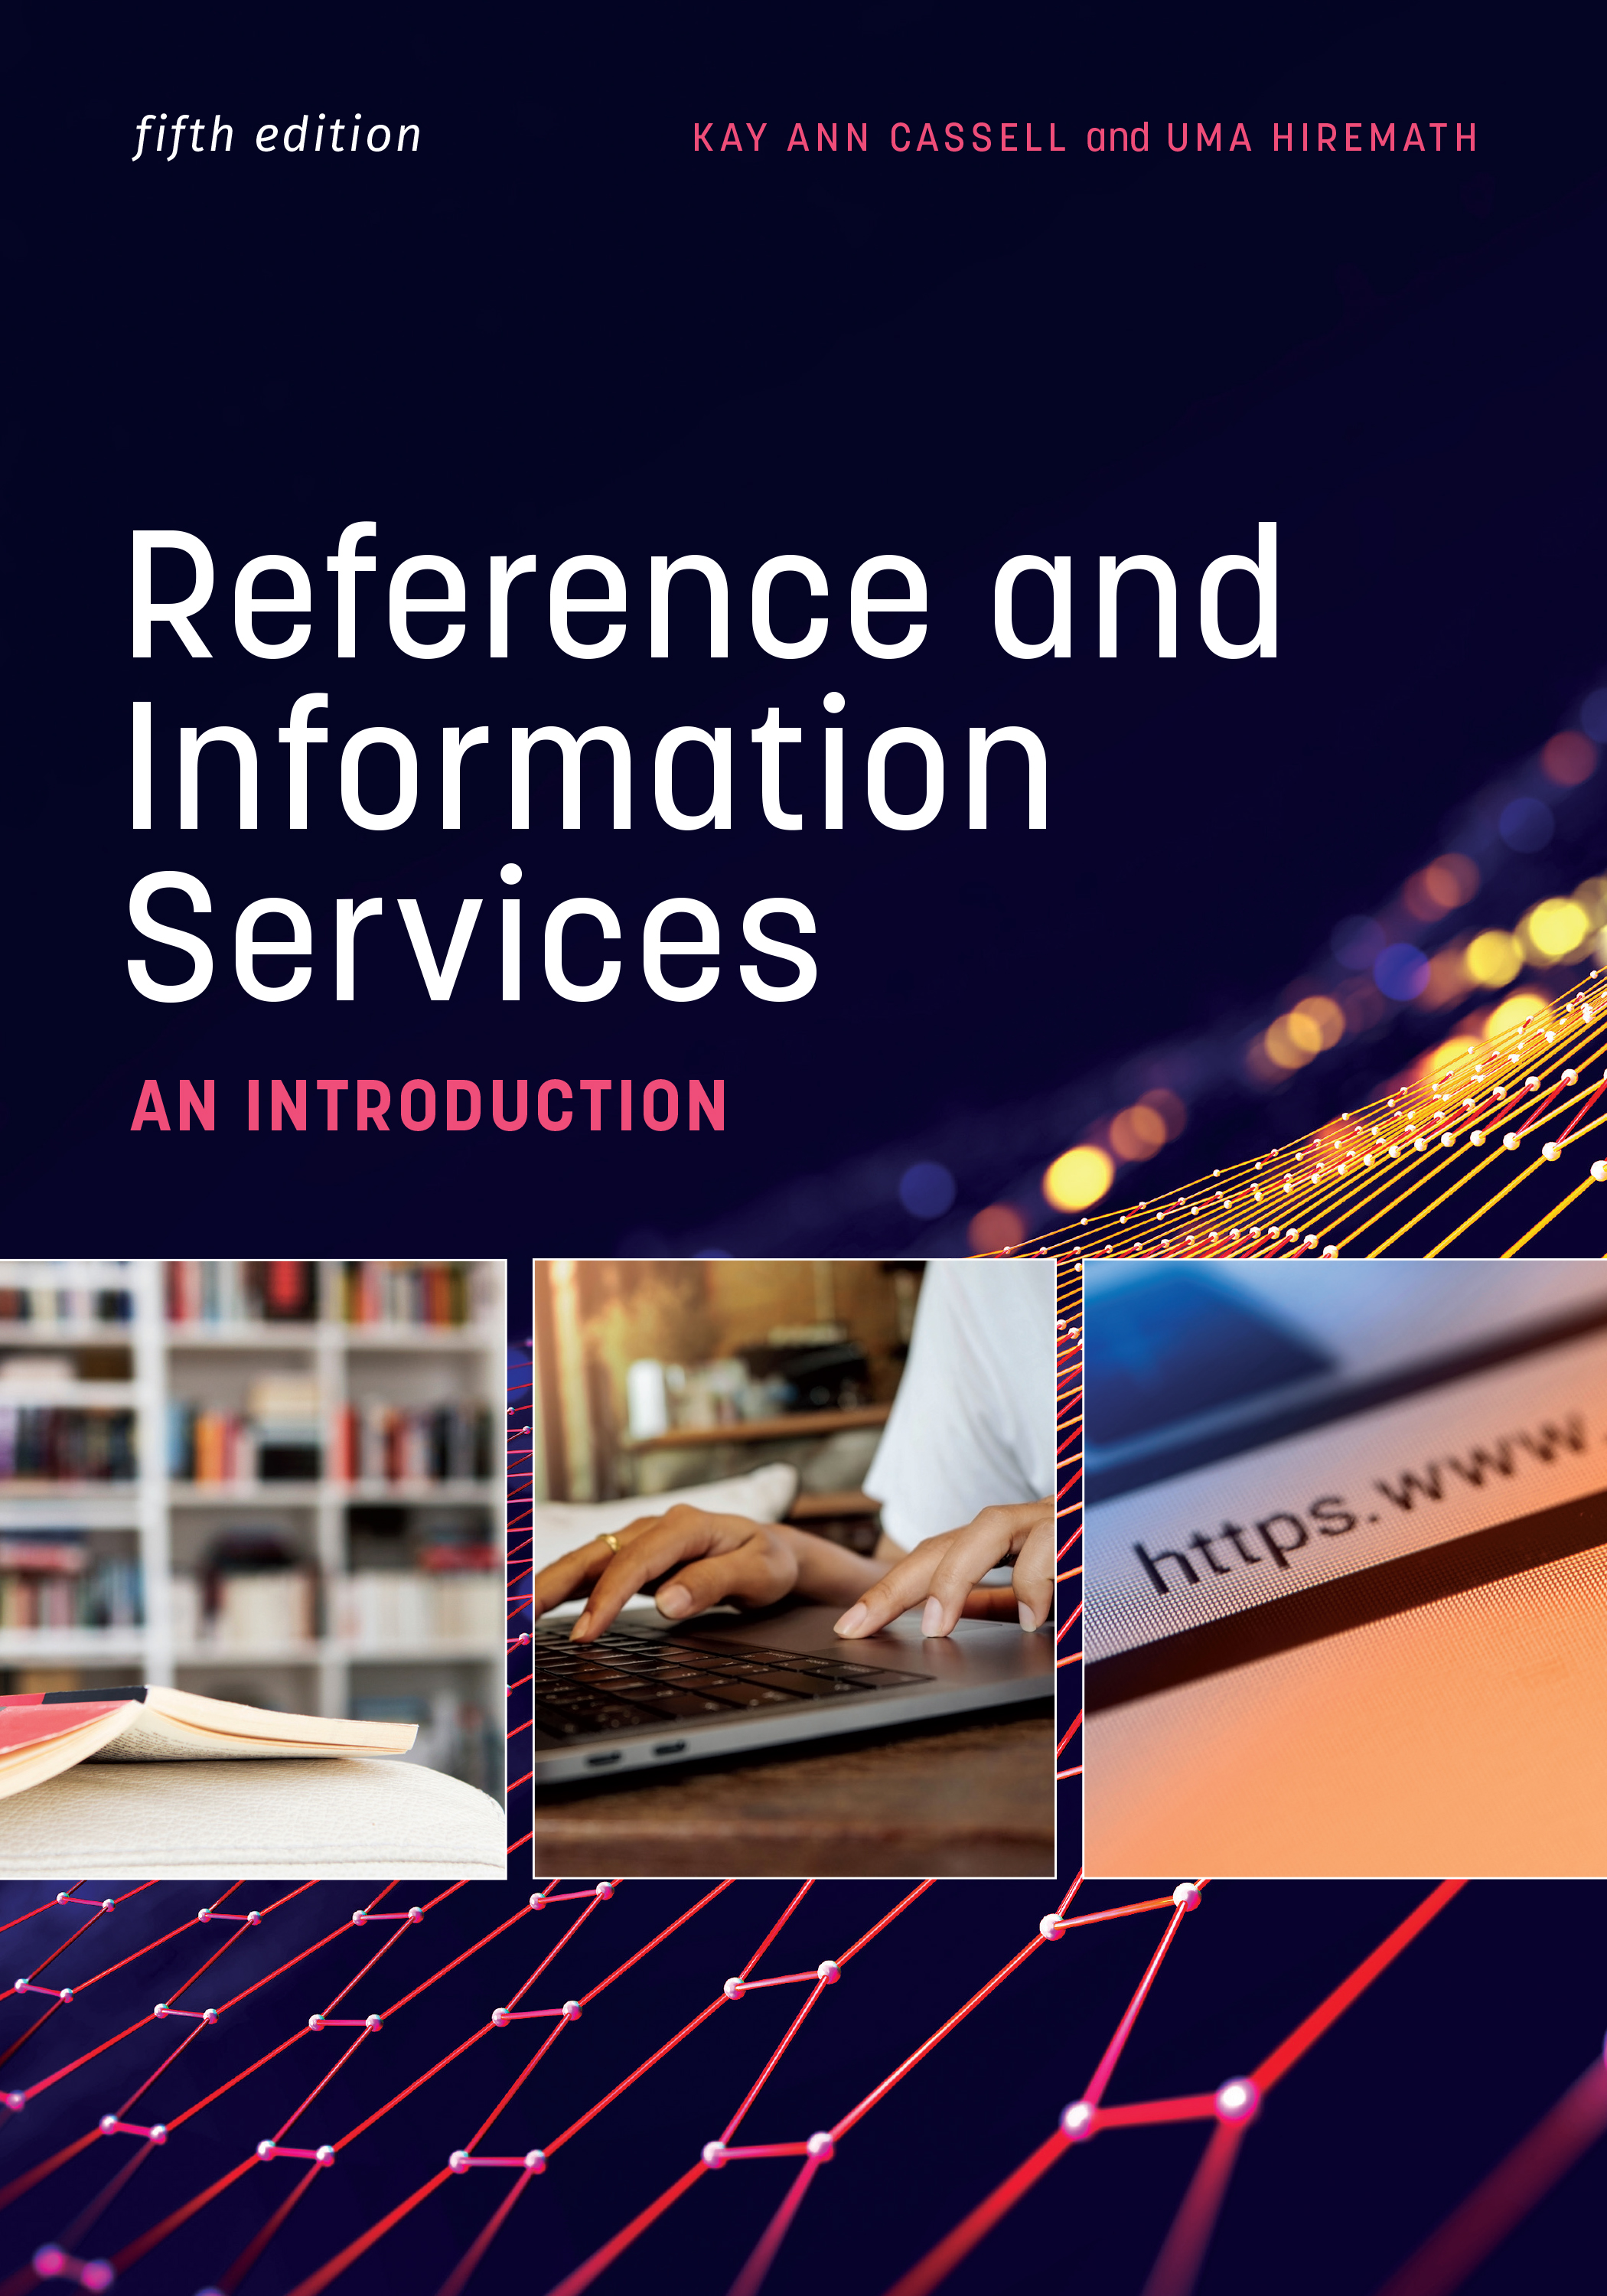 book cover for "Reference and Information Services: An Introduction, Fifth Edition"